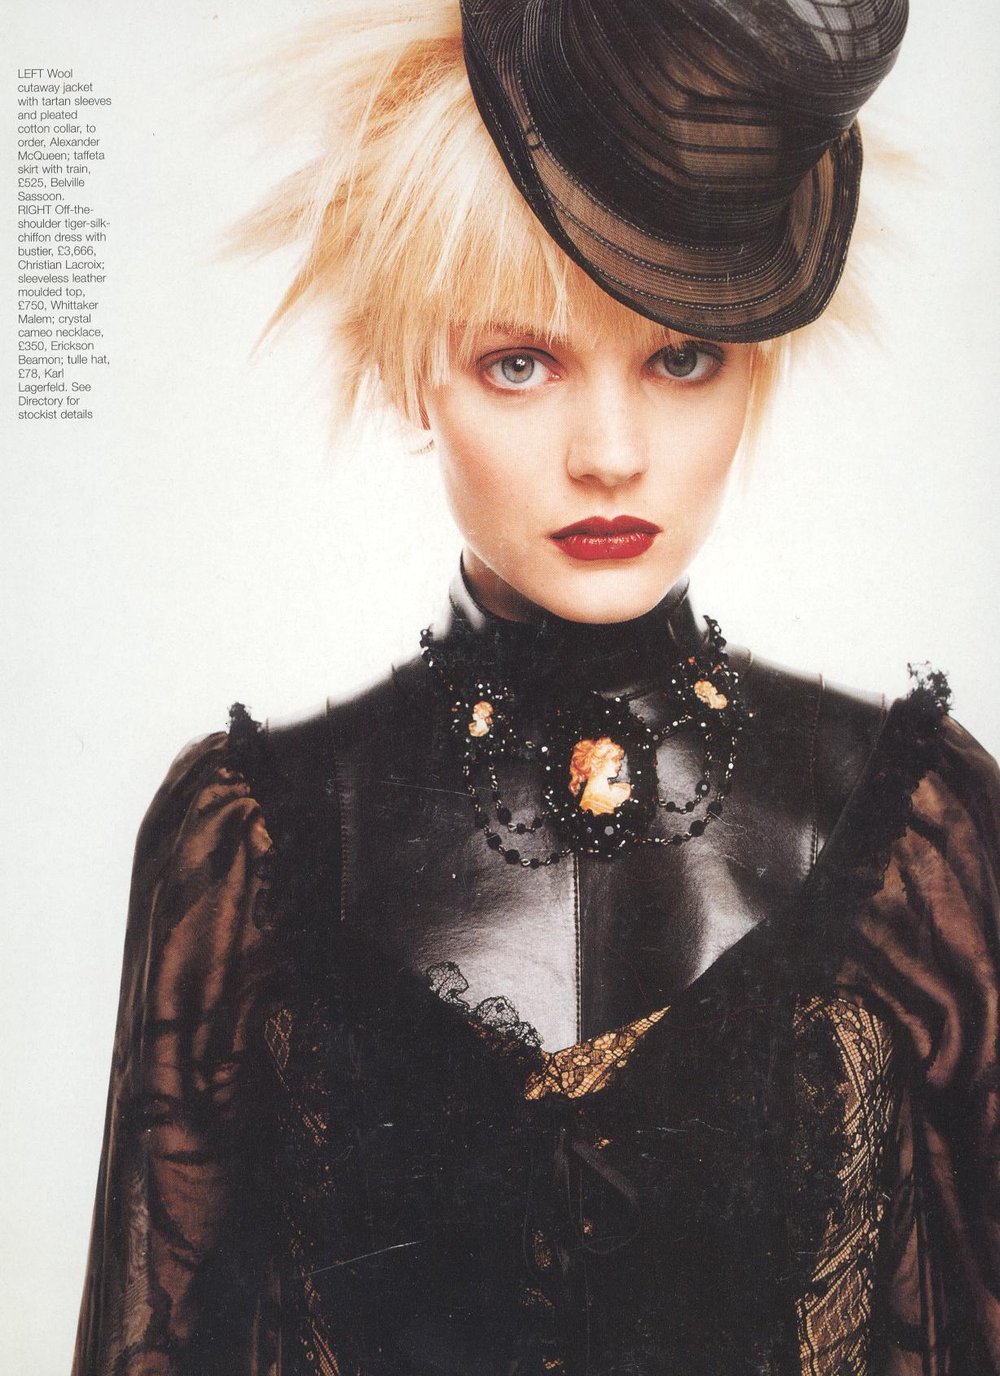 whitaker-malem-fashion-formed-leather-high-neck-gilet-breastplate-marie-claire-magazine.jpg